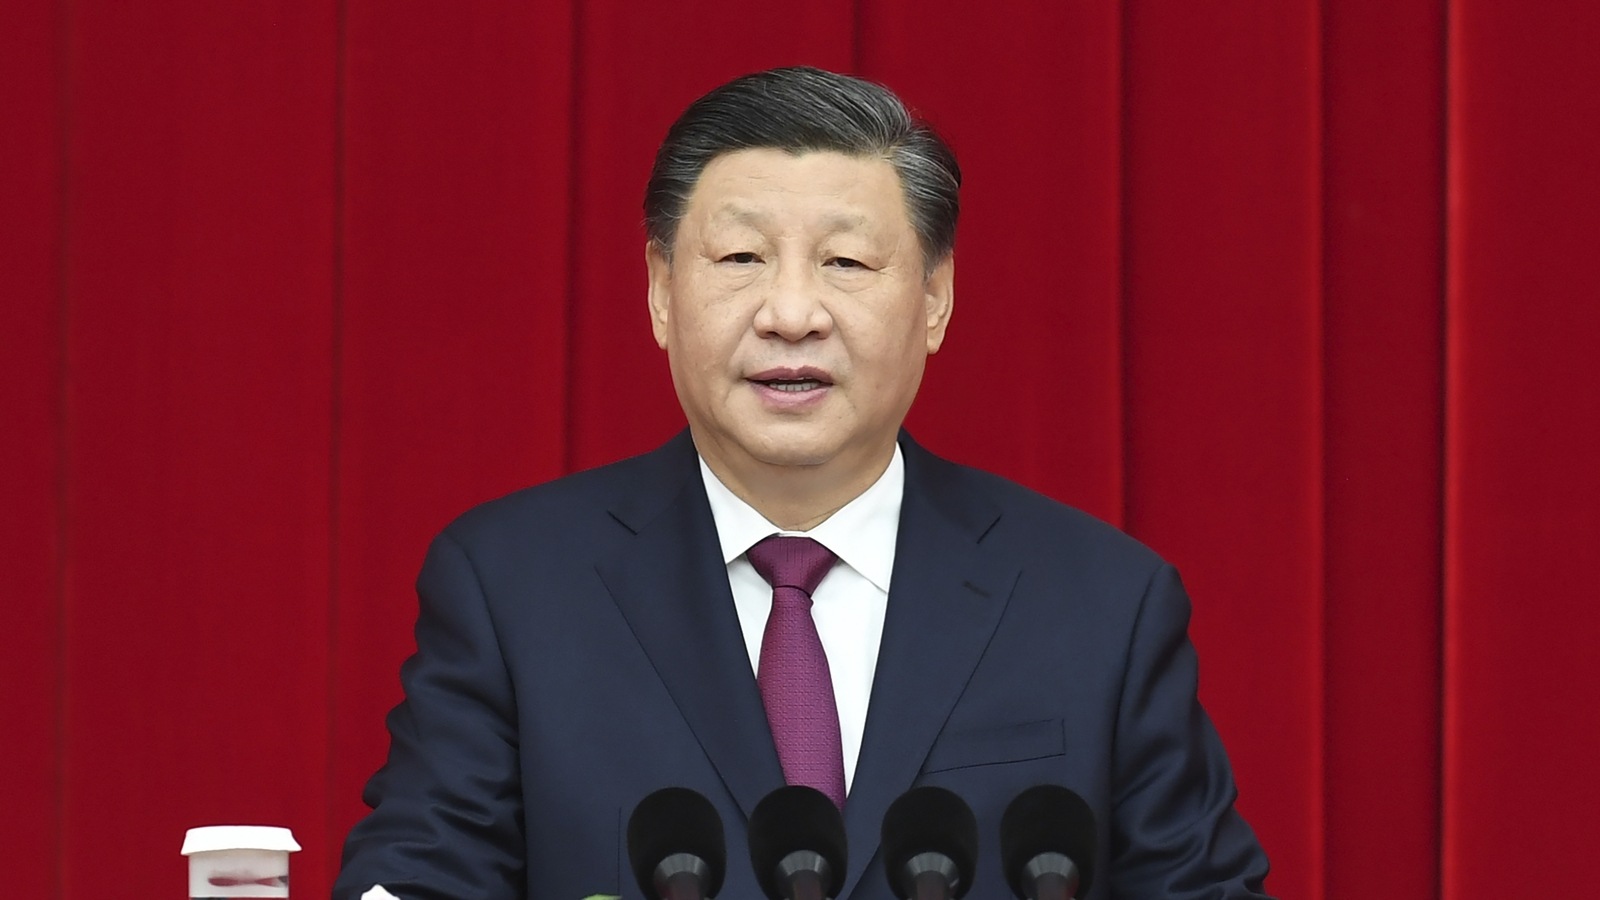 Xi Jinping 'concerned' over Covid cases in China's rural areas